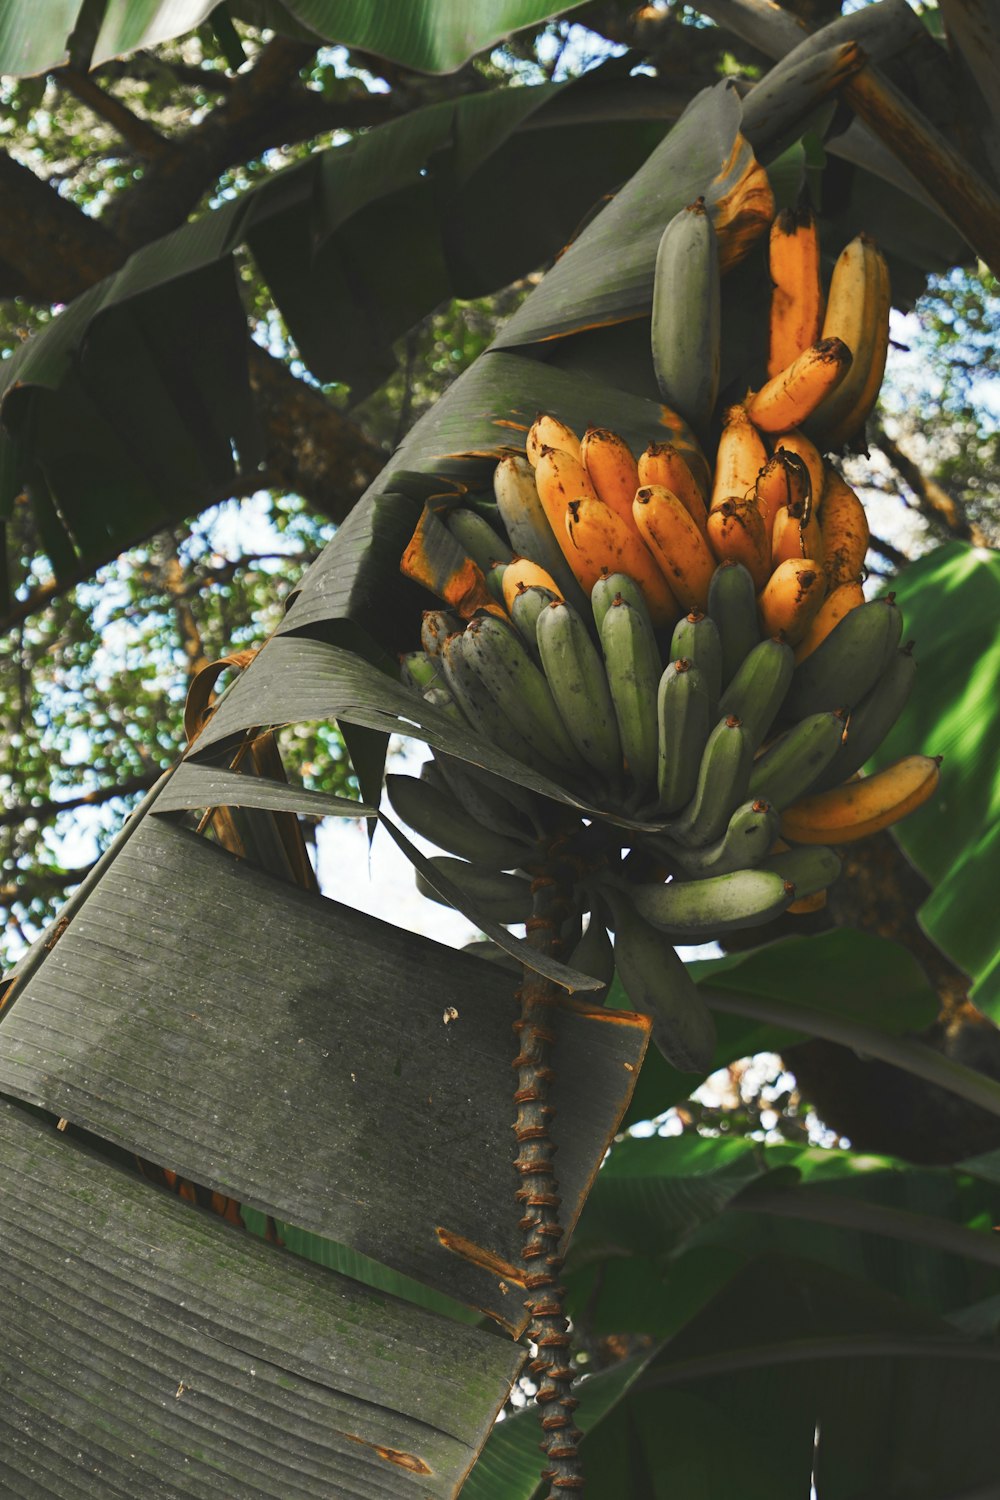 a bunch of unripe bananas hanging from a tree